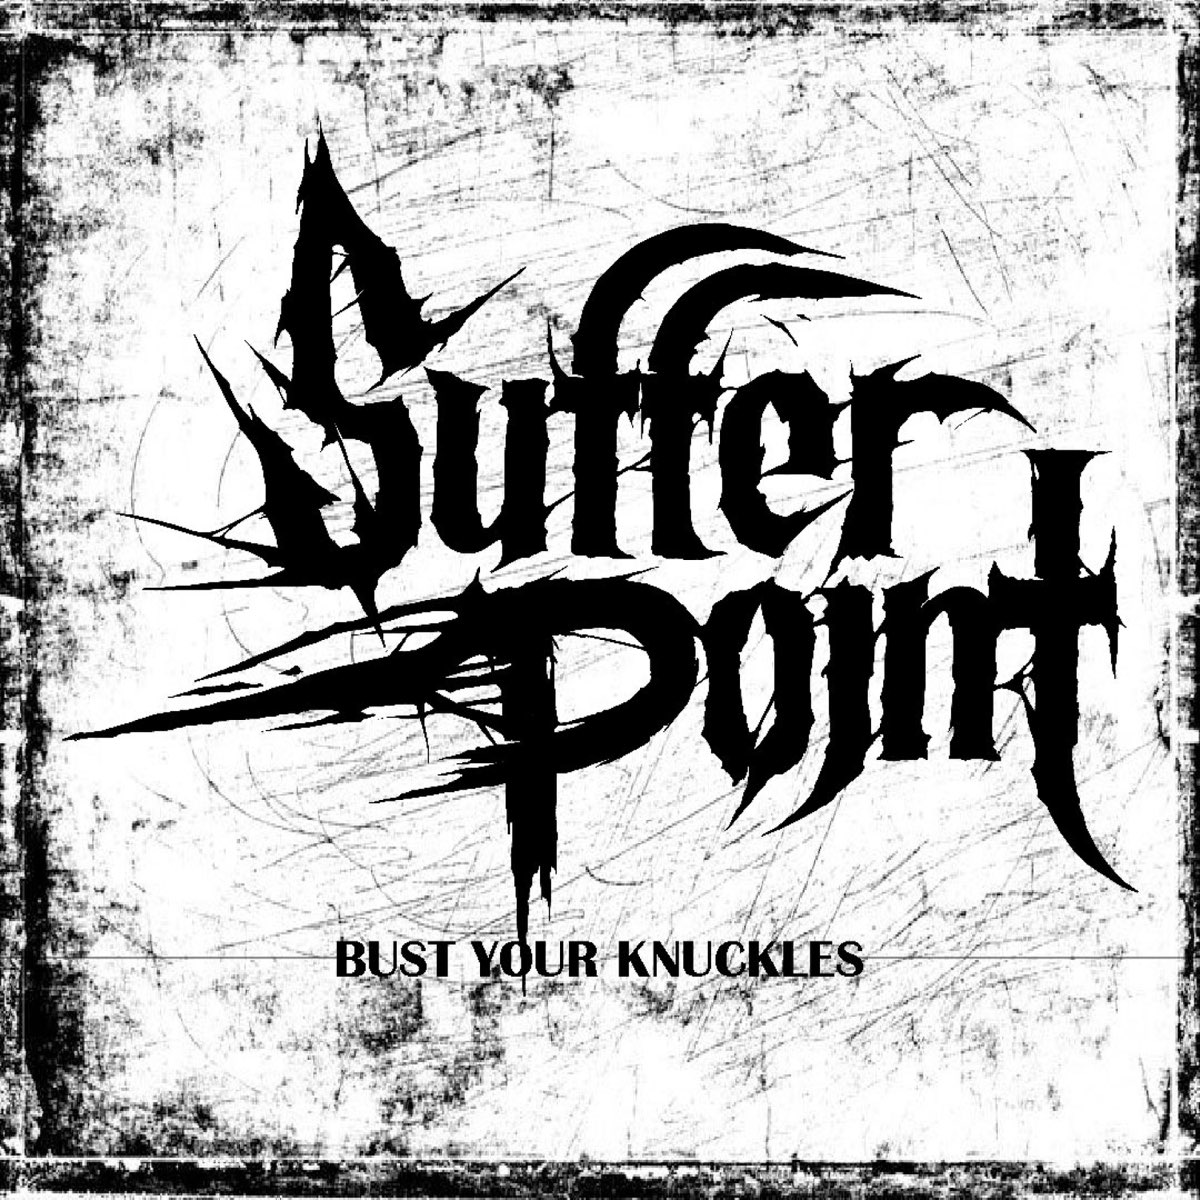 ‎Bust Your Knuckles - Single - Album by Suffer Point - Apple Music